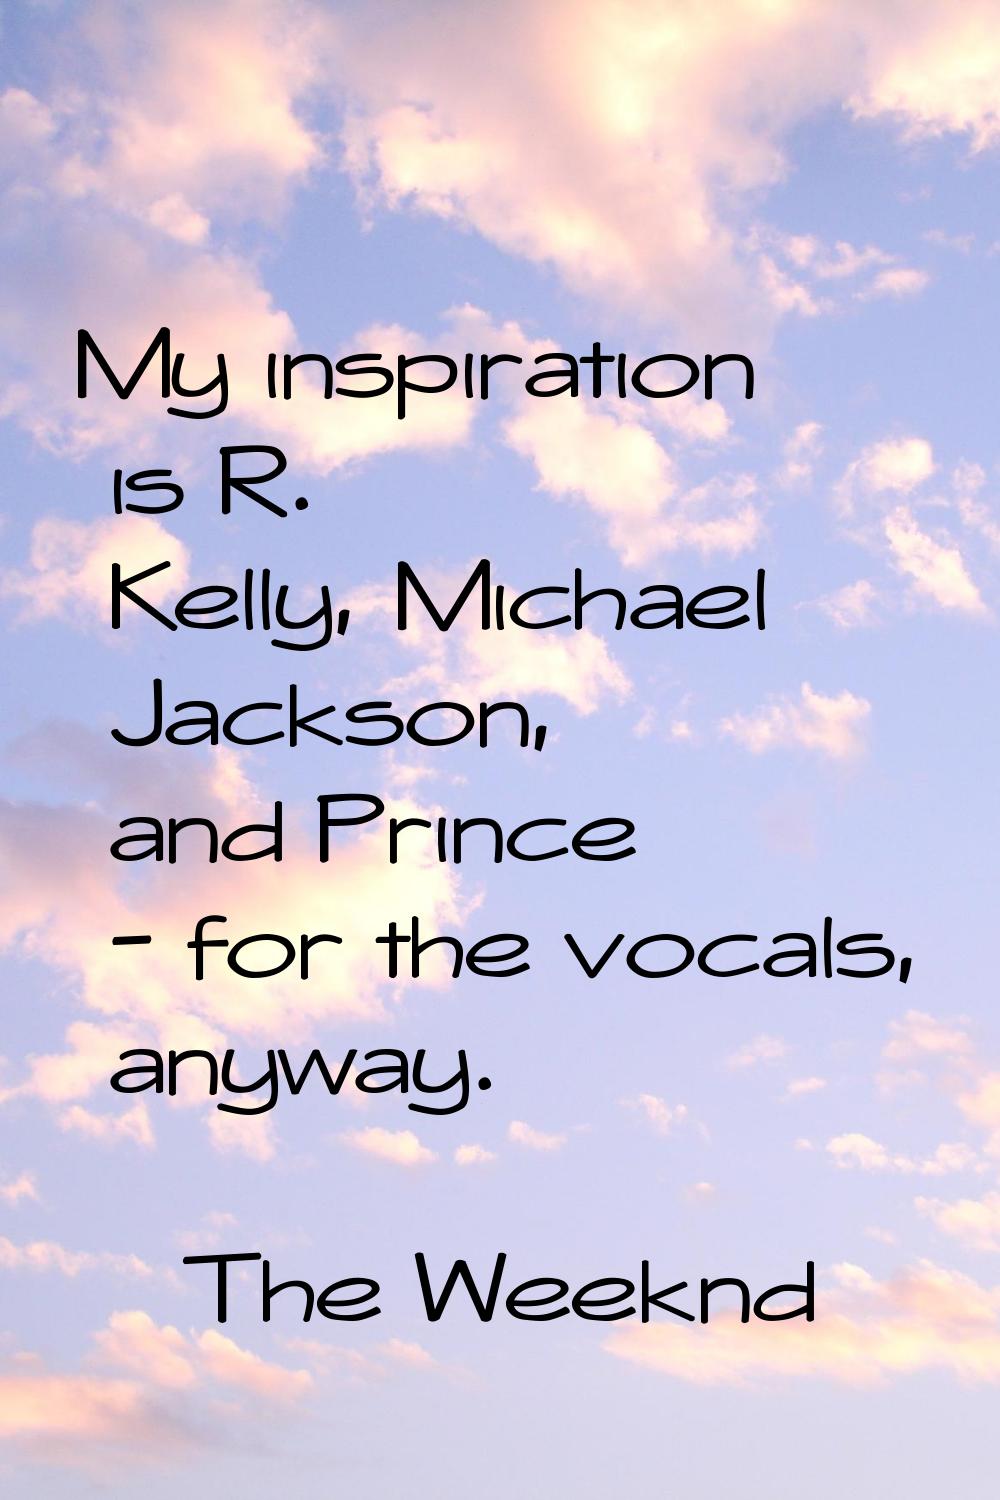 My inspiration is R. Kelly, Michael Jackson, and Prince - for the vocals, anyway.